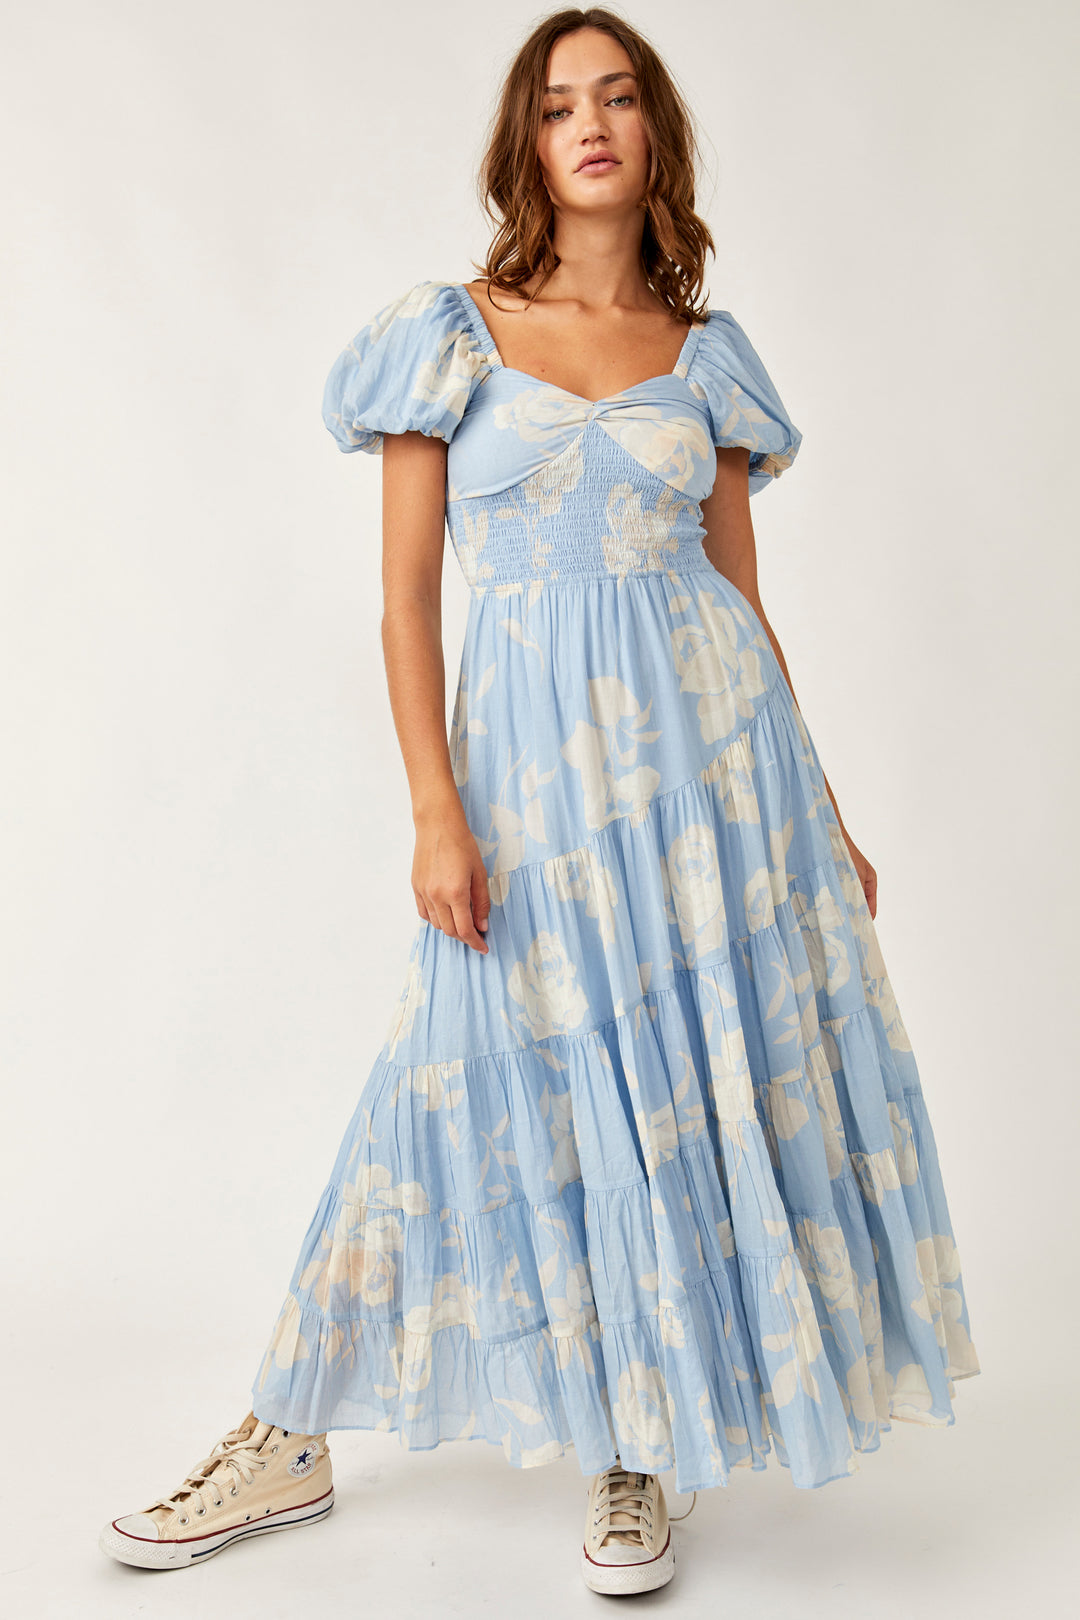 Free People Short Sleeved Sundrenched Sky Dress